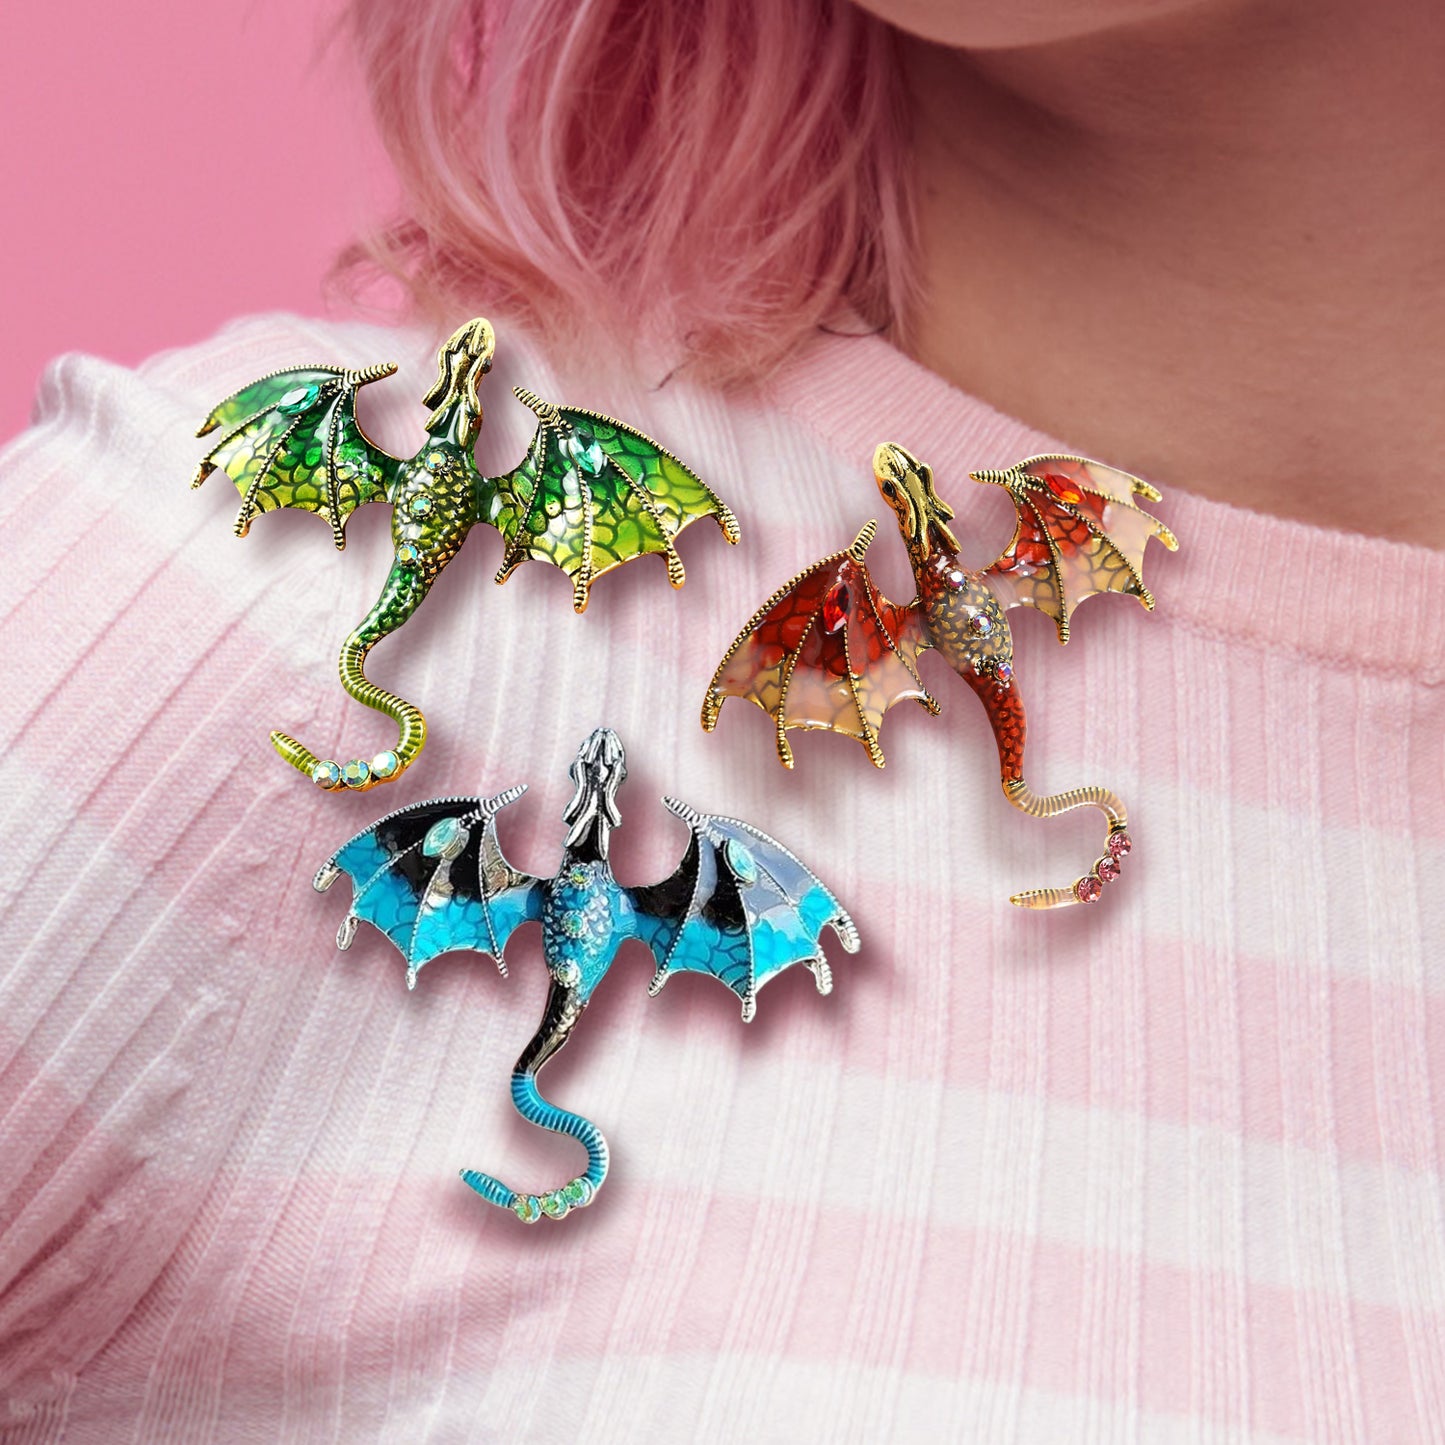 Close up of a model's shoulder, in a pink and white striped shirt. Attached to her shirt are three brooches in the shapes of dragons in flight. One dragon is green, one is red, and one is blue.